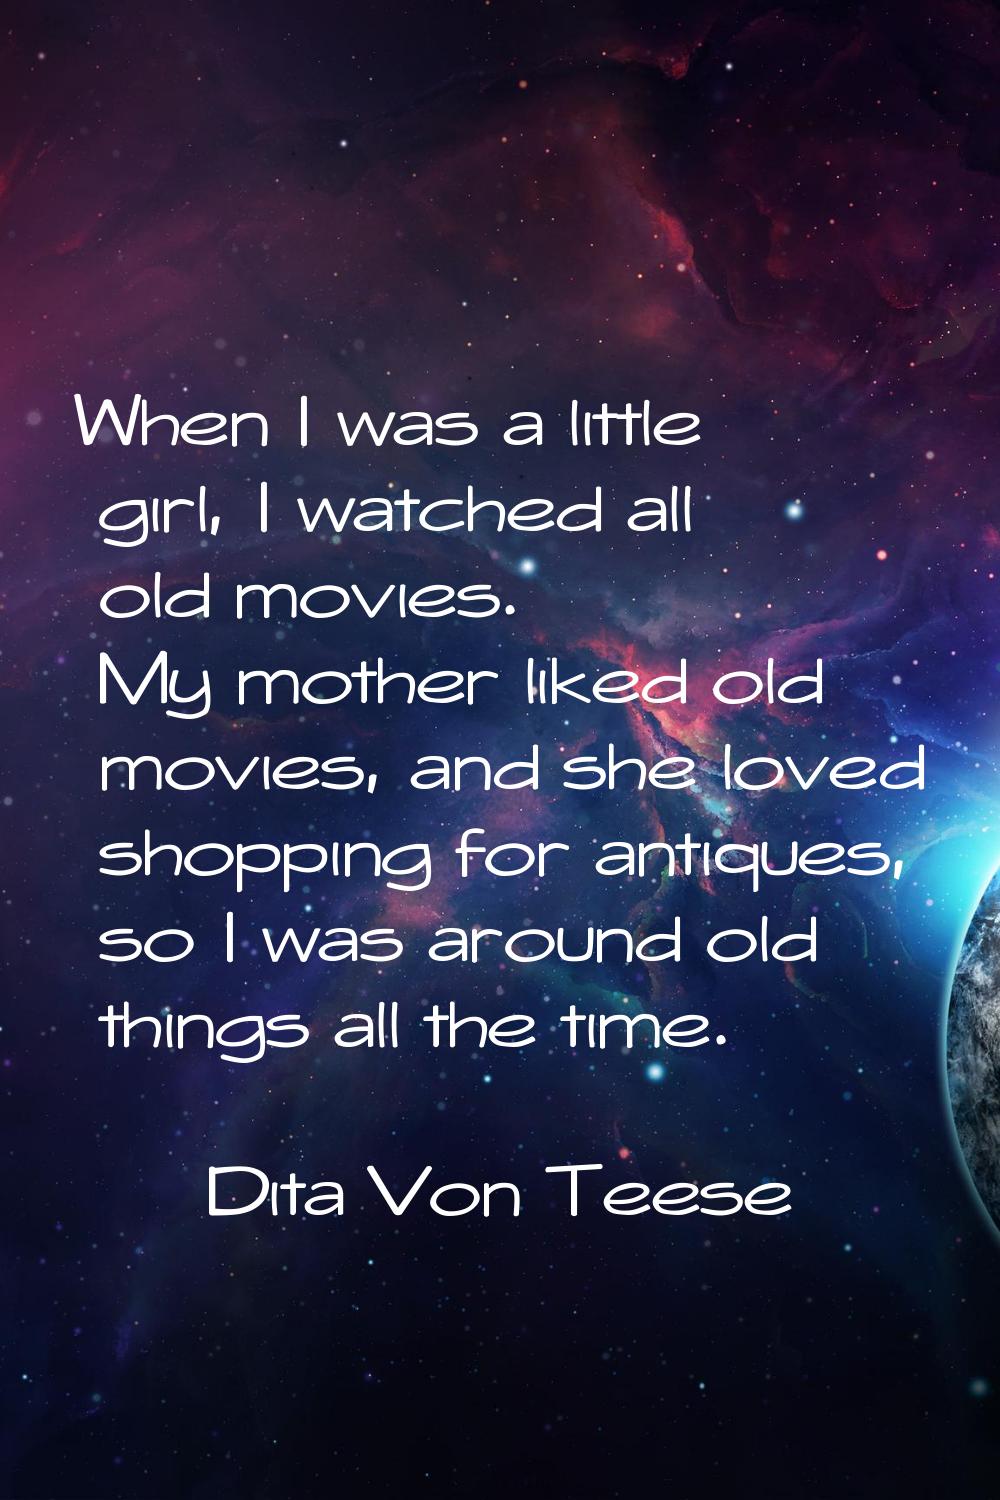 When I was a little girl, I watched all old movies. My mother liked old movies, and she loved shopp